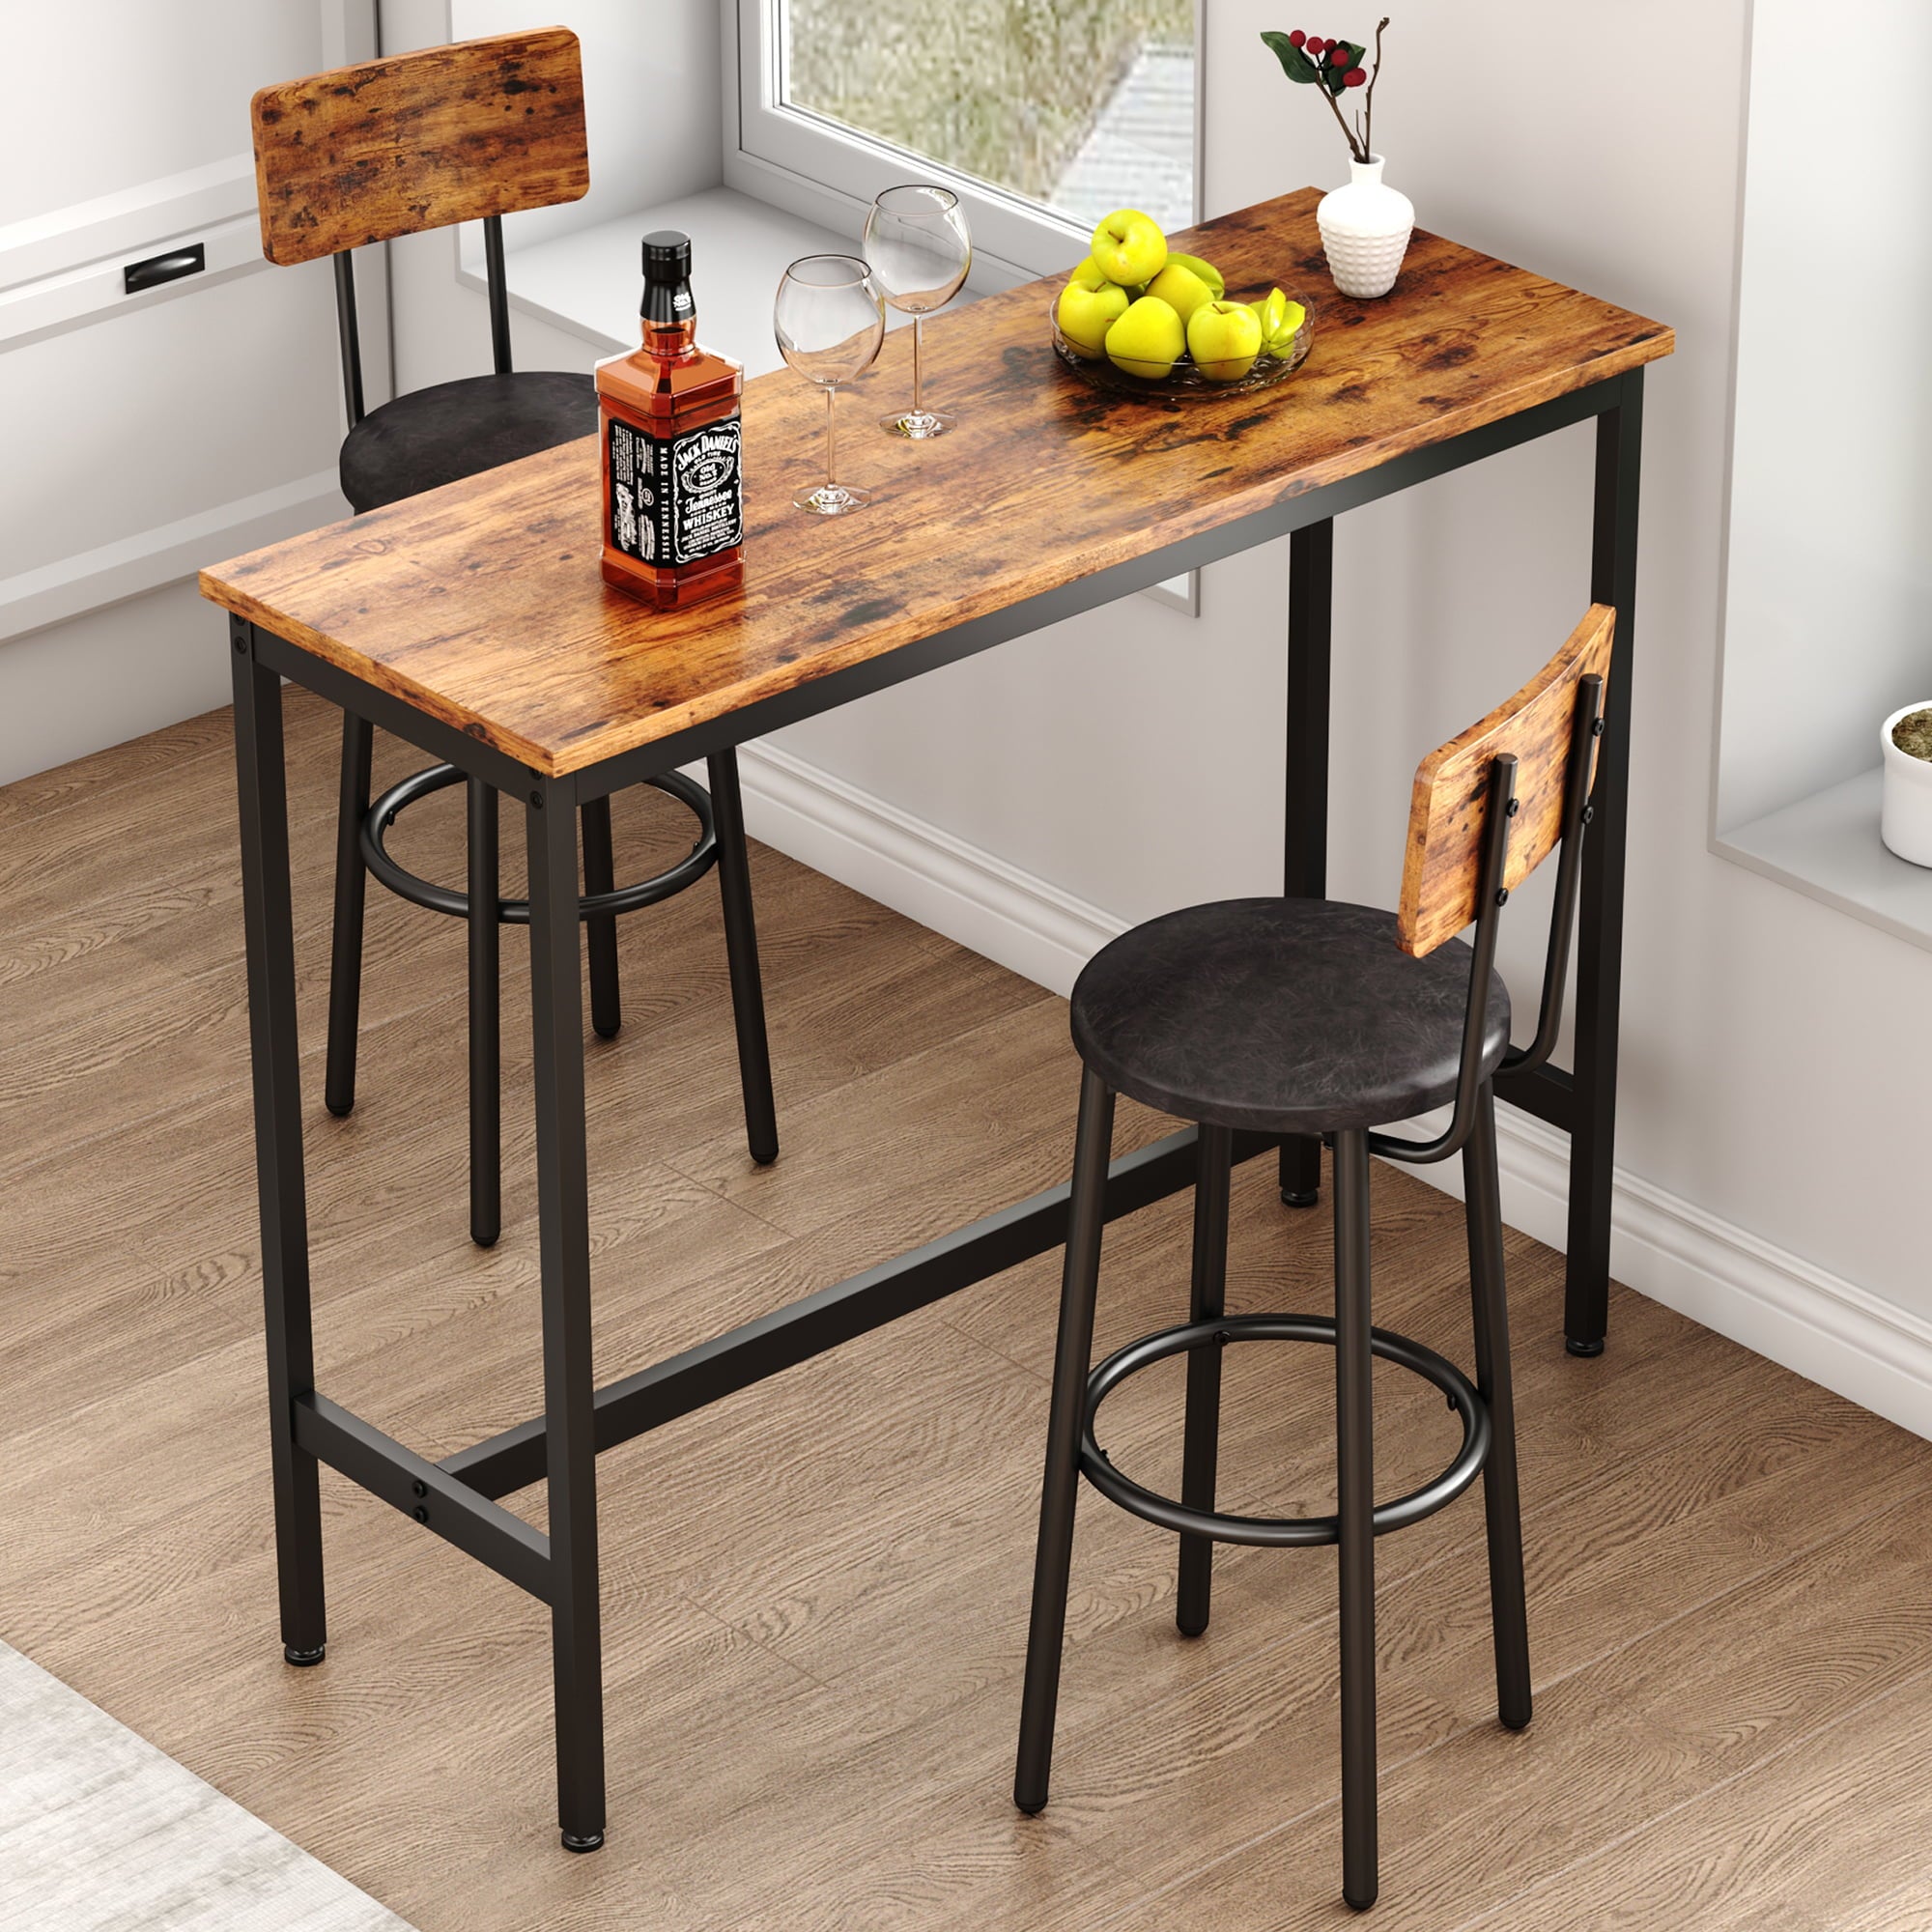 uhomepro 3 Pieces Bar Table Set, Modern Counter Height Kitchen Table a -  Uhomepro